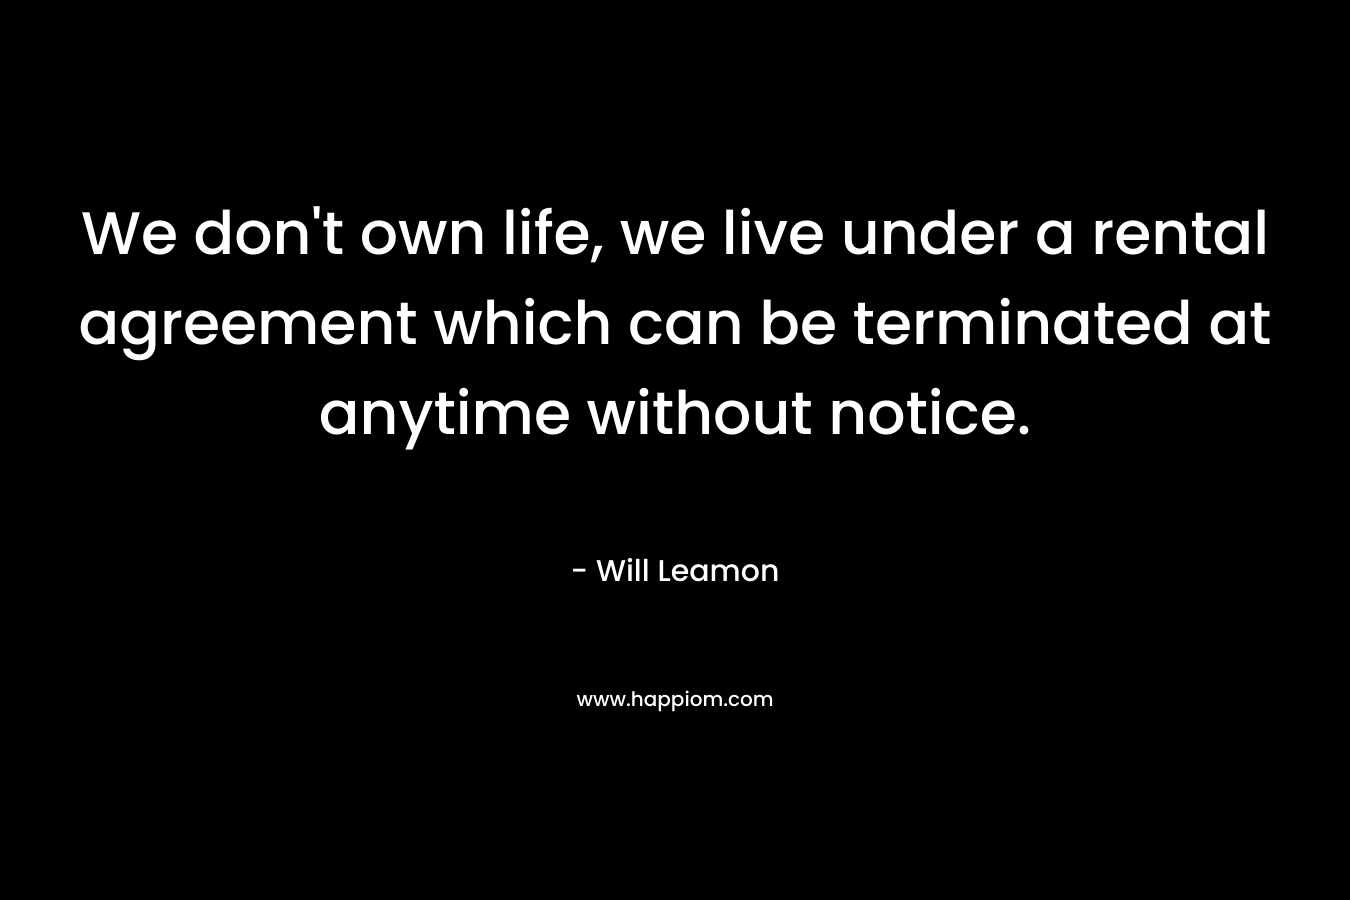 We don't own life, we live under a rental agreement which can be terminated at anytime without notice.